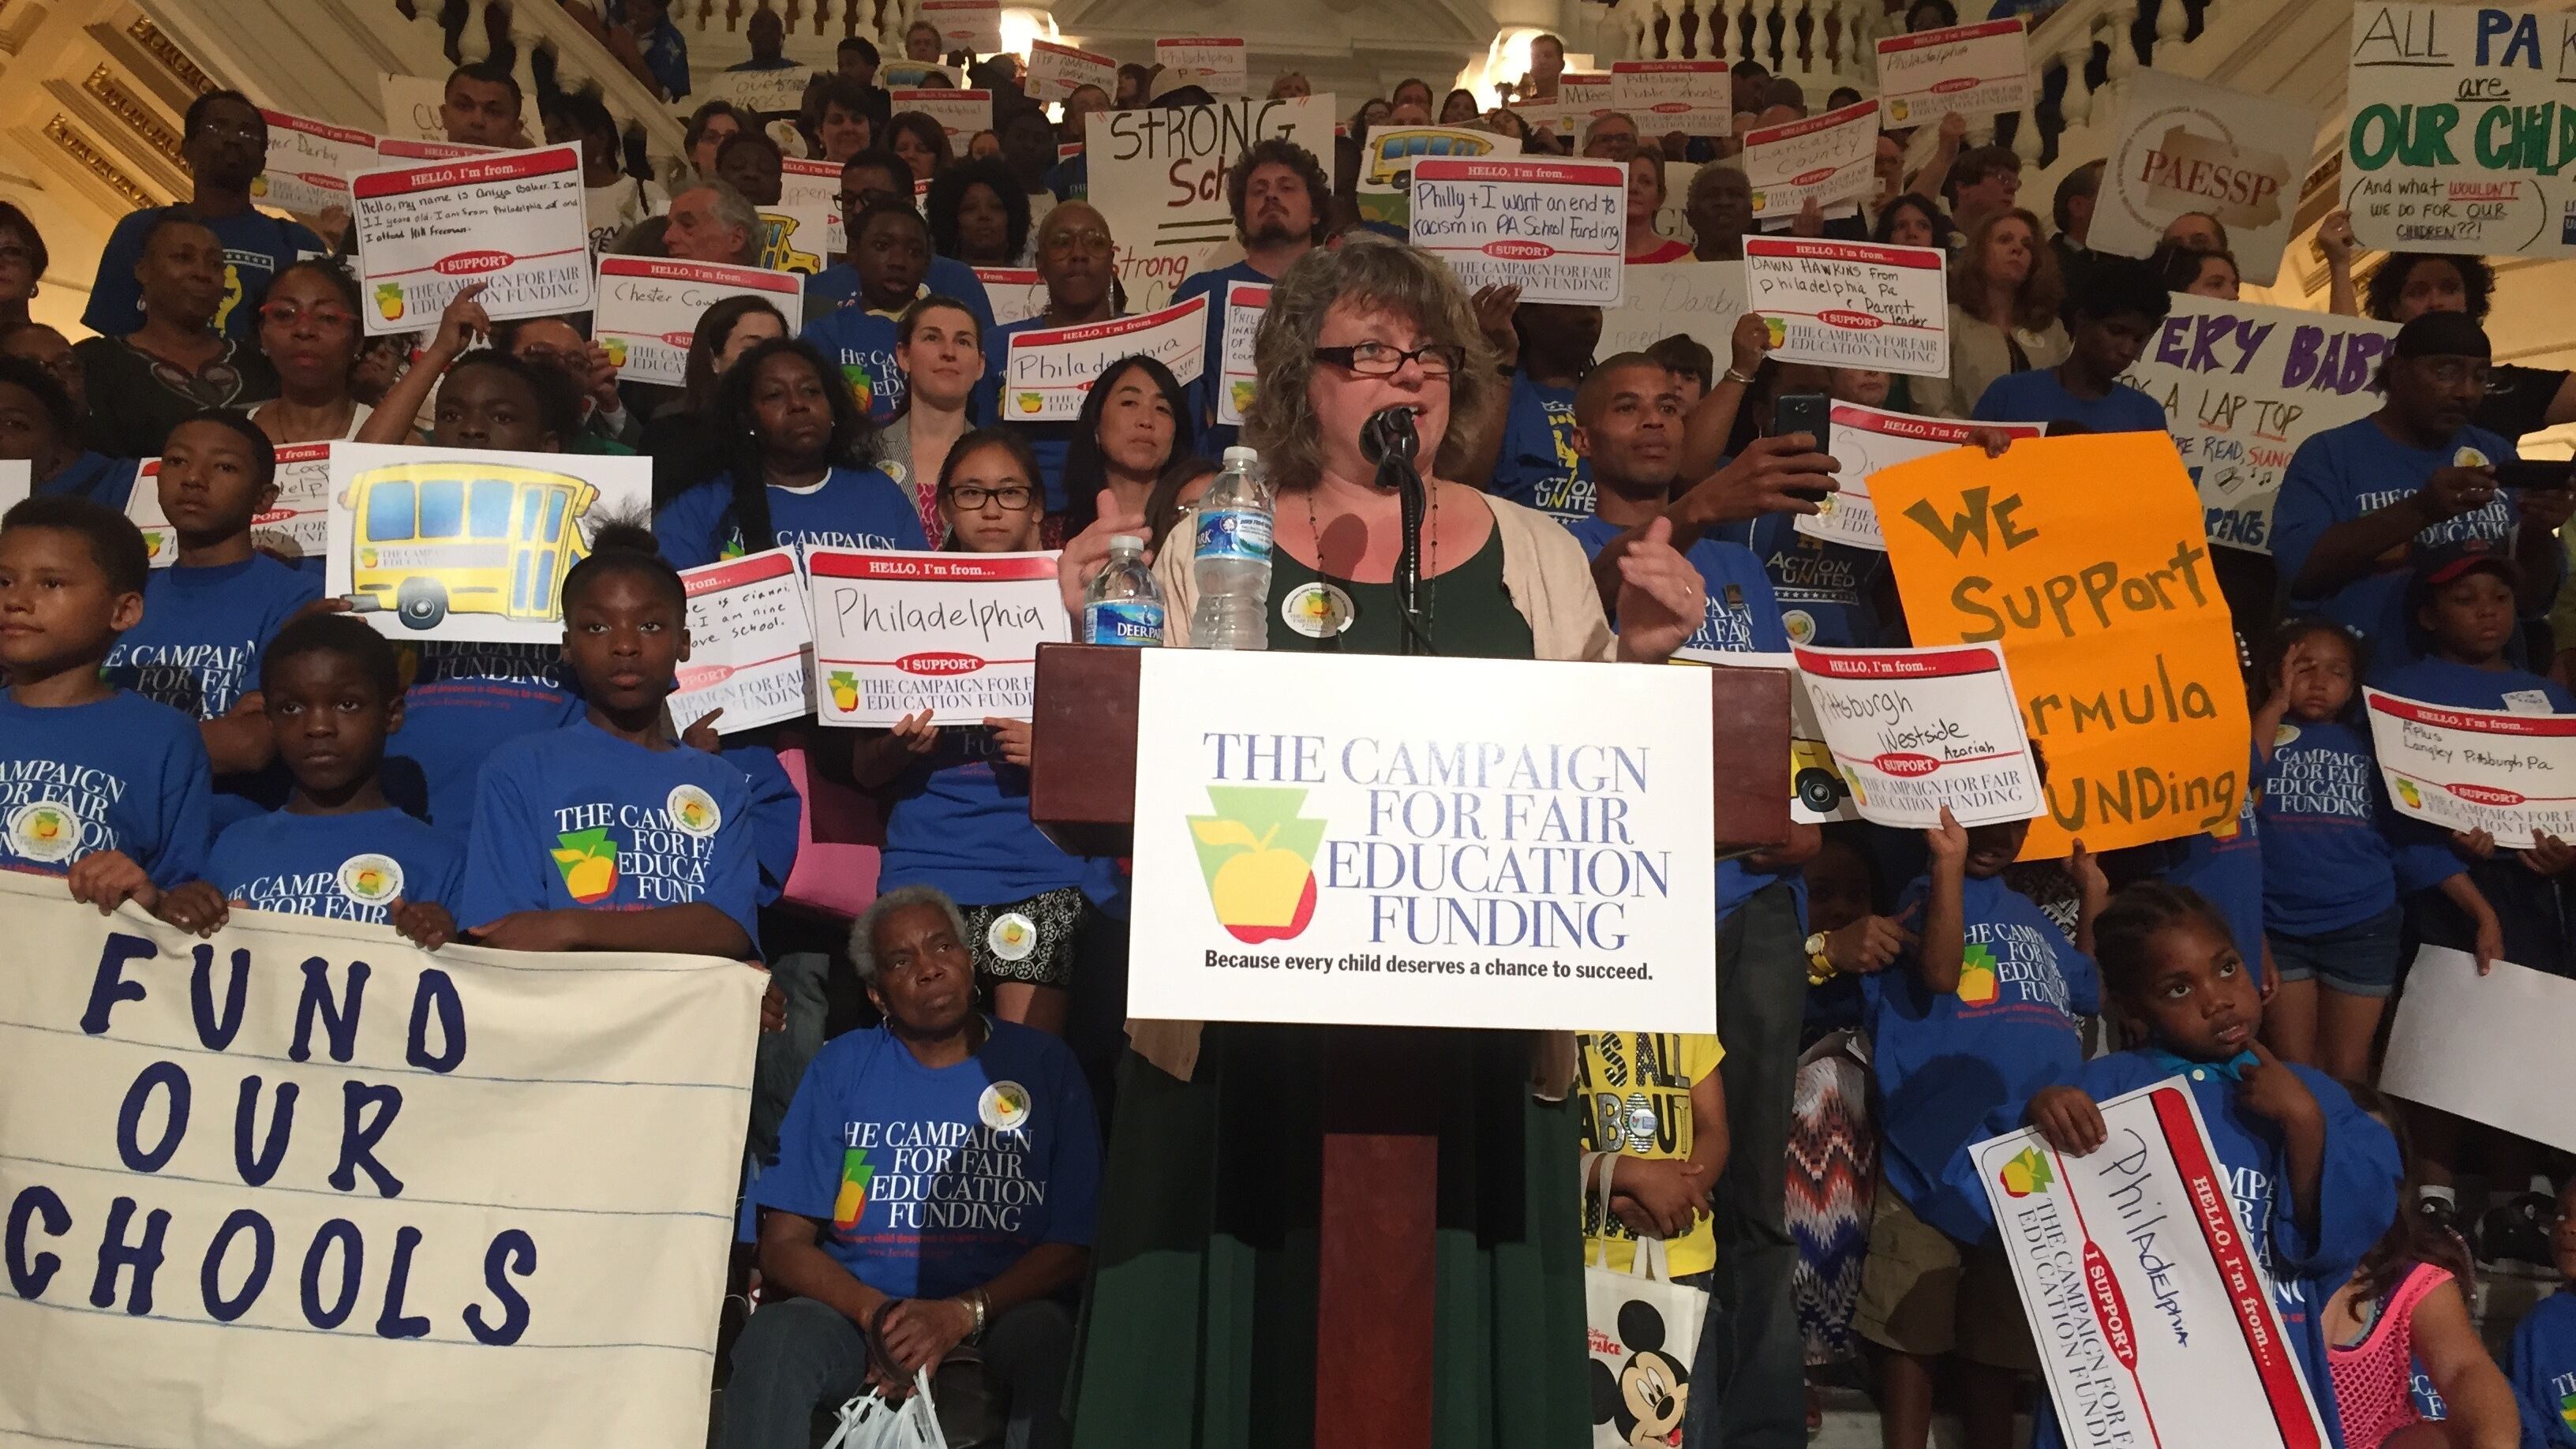 A woman in a green dress stands at a podium and speaks into a microphone while several people hold up signs behind her. The podium has a placard that says “The Campaign For Fair Education Funding.” One sign to the left says “Fund Our Schools.”